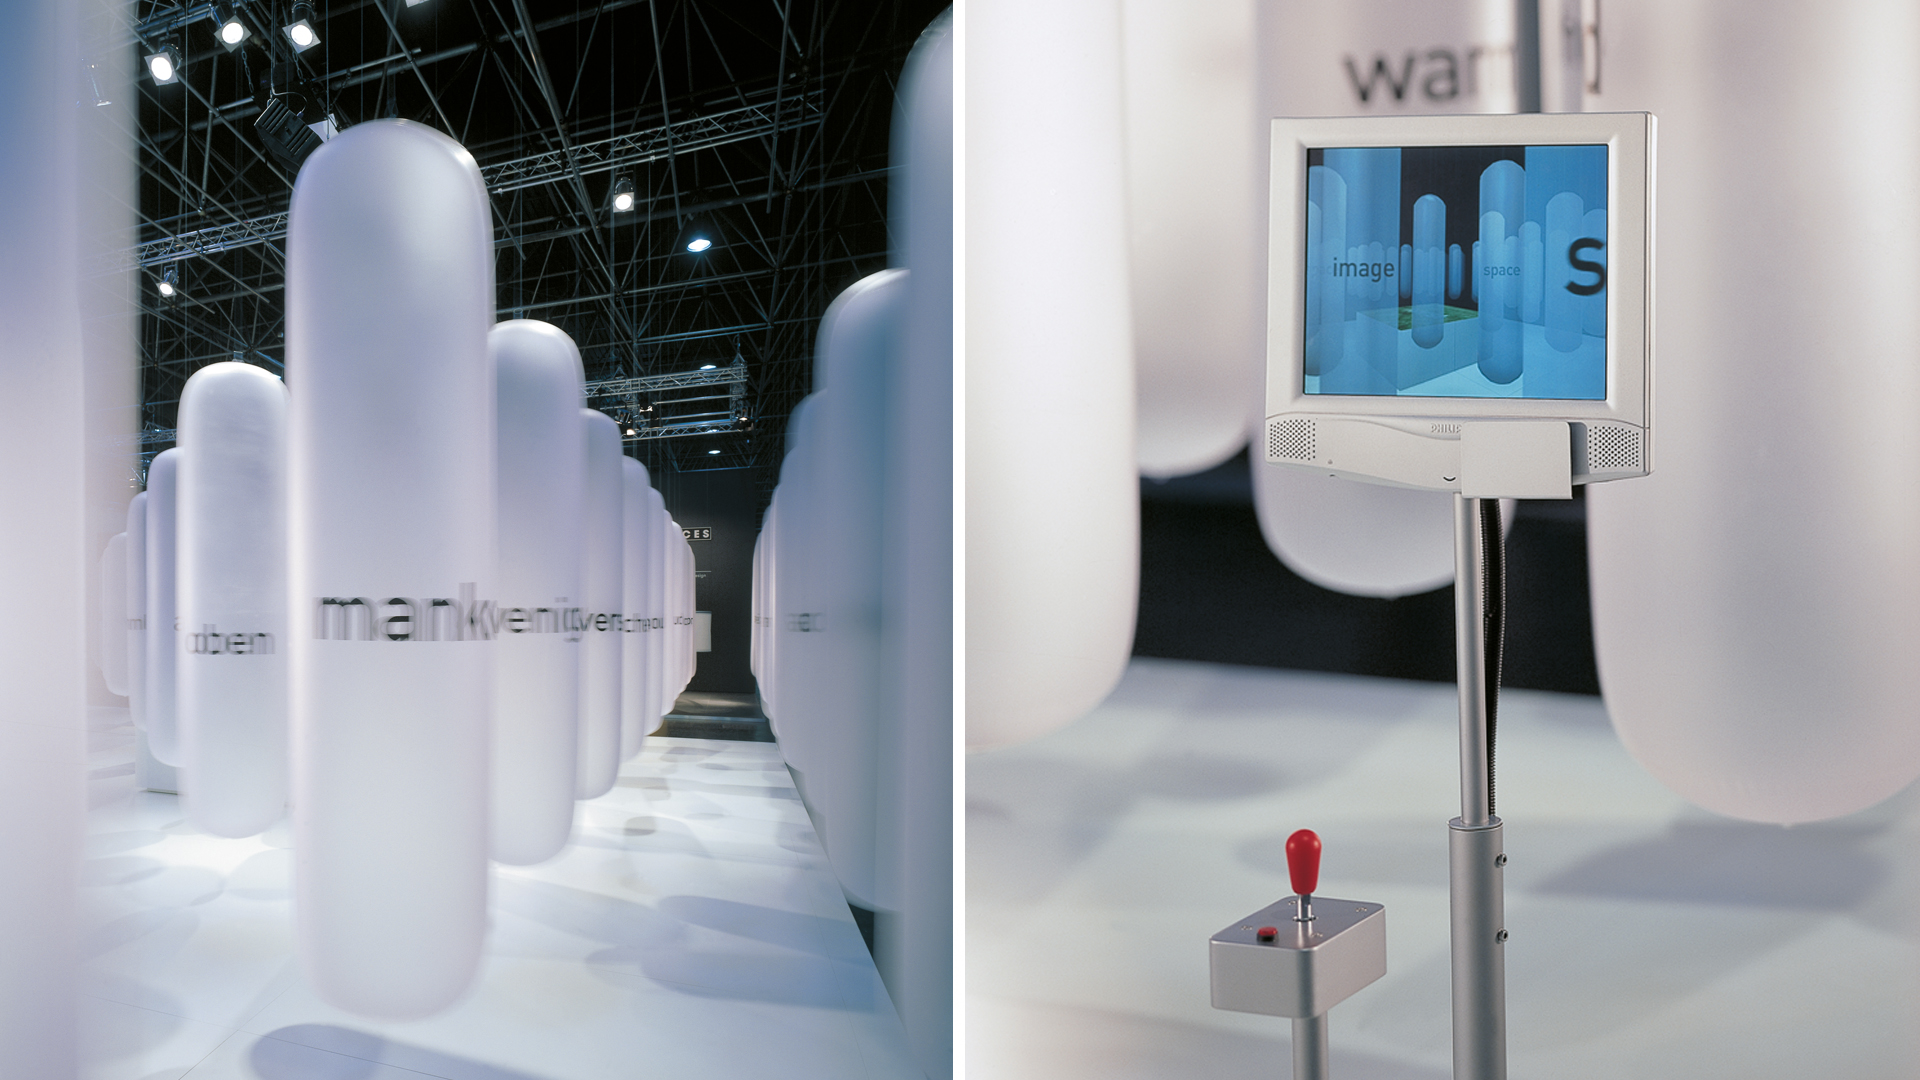 Dart stages the D'art Design Gruppe's own fair stand at the EuroShop 2002